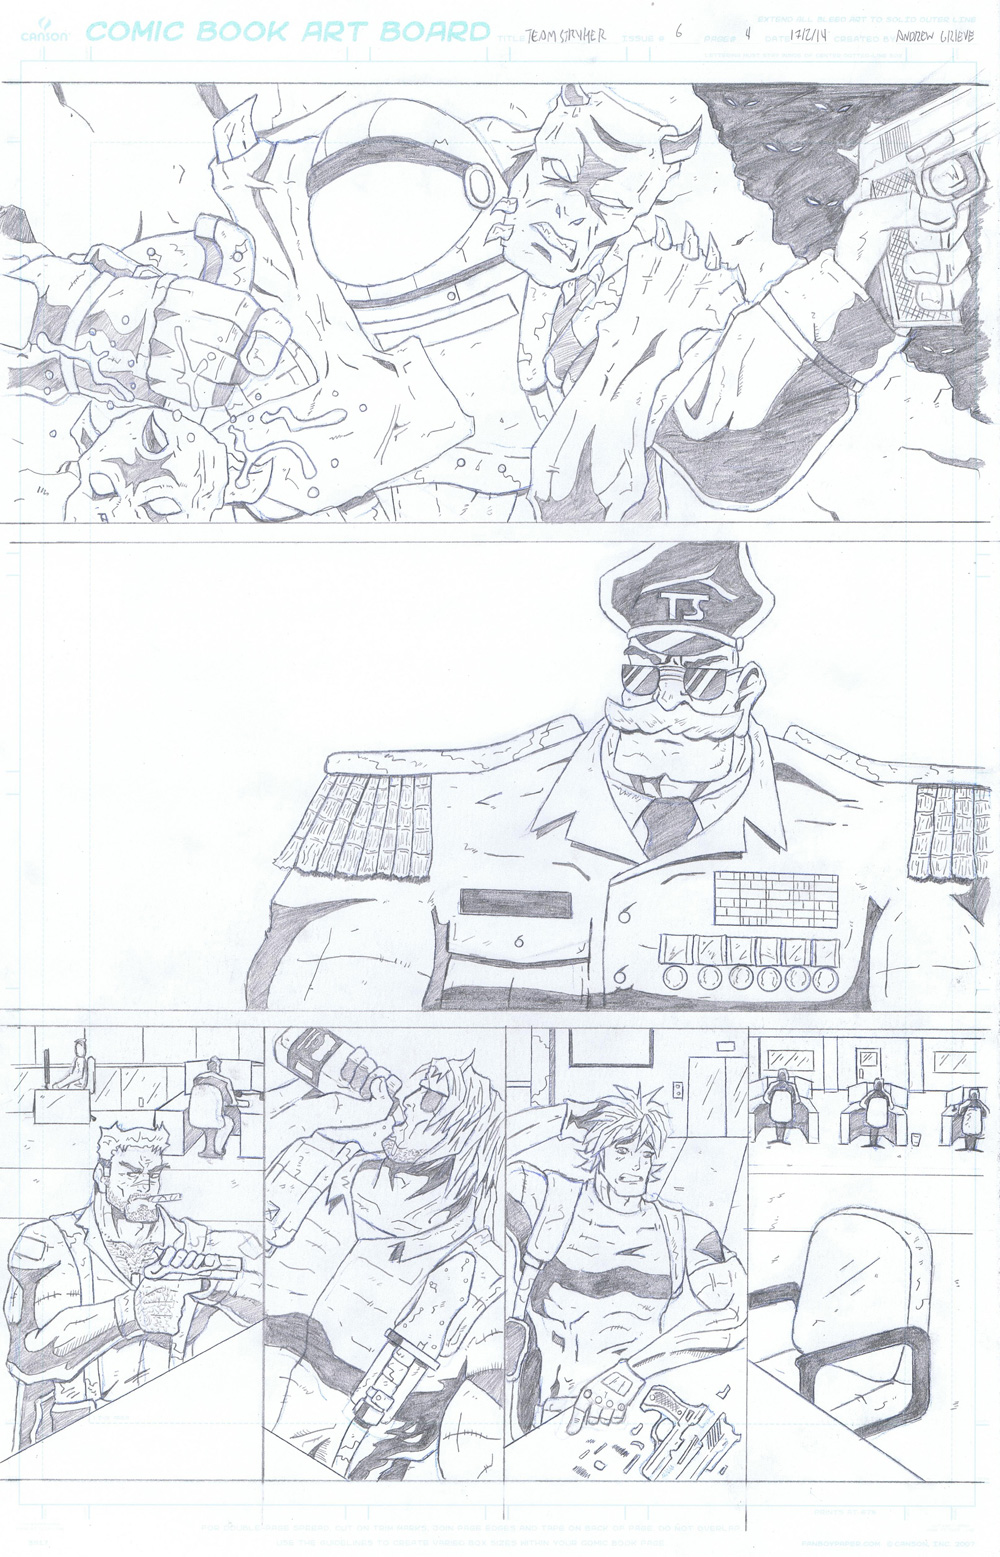 MISSION 006: PAGE 04 PENCIL